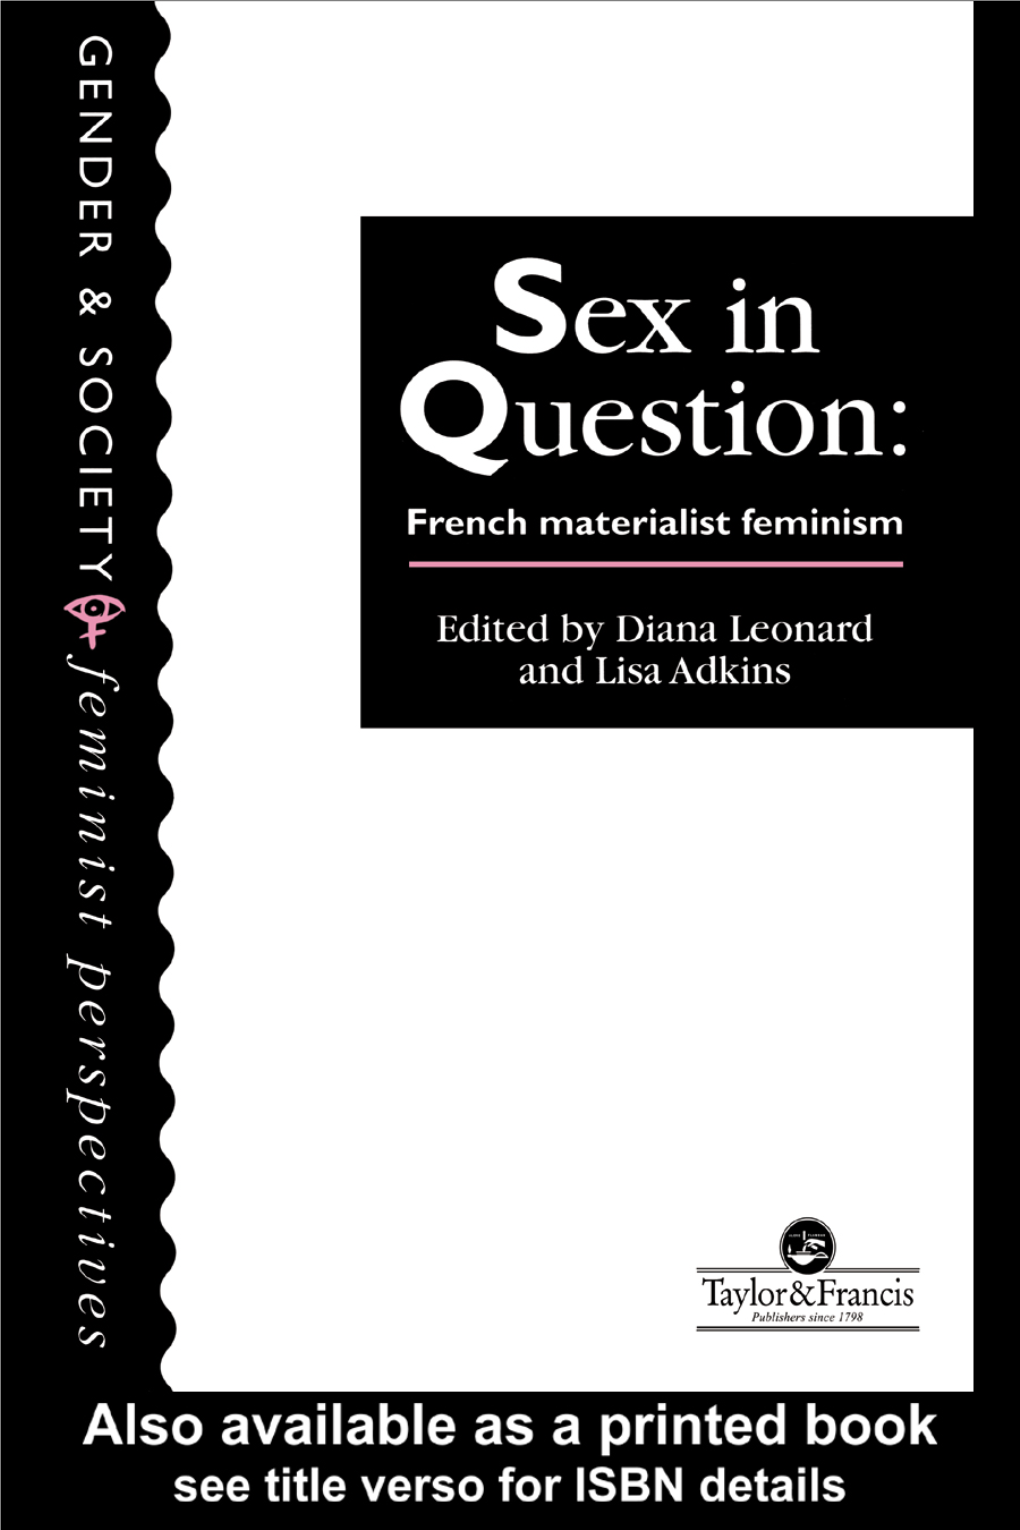 Sex in Question